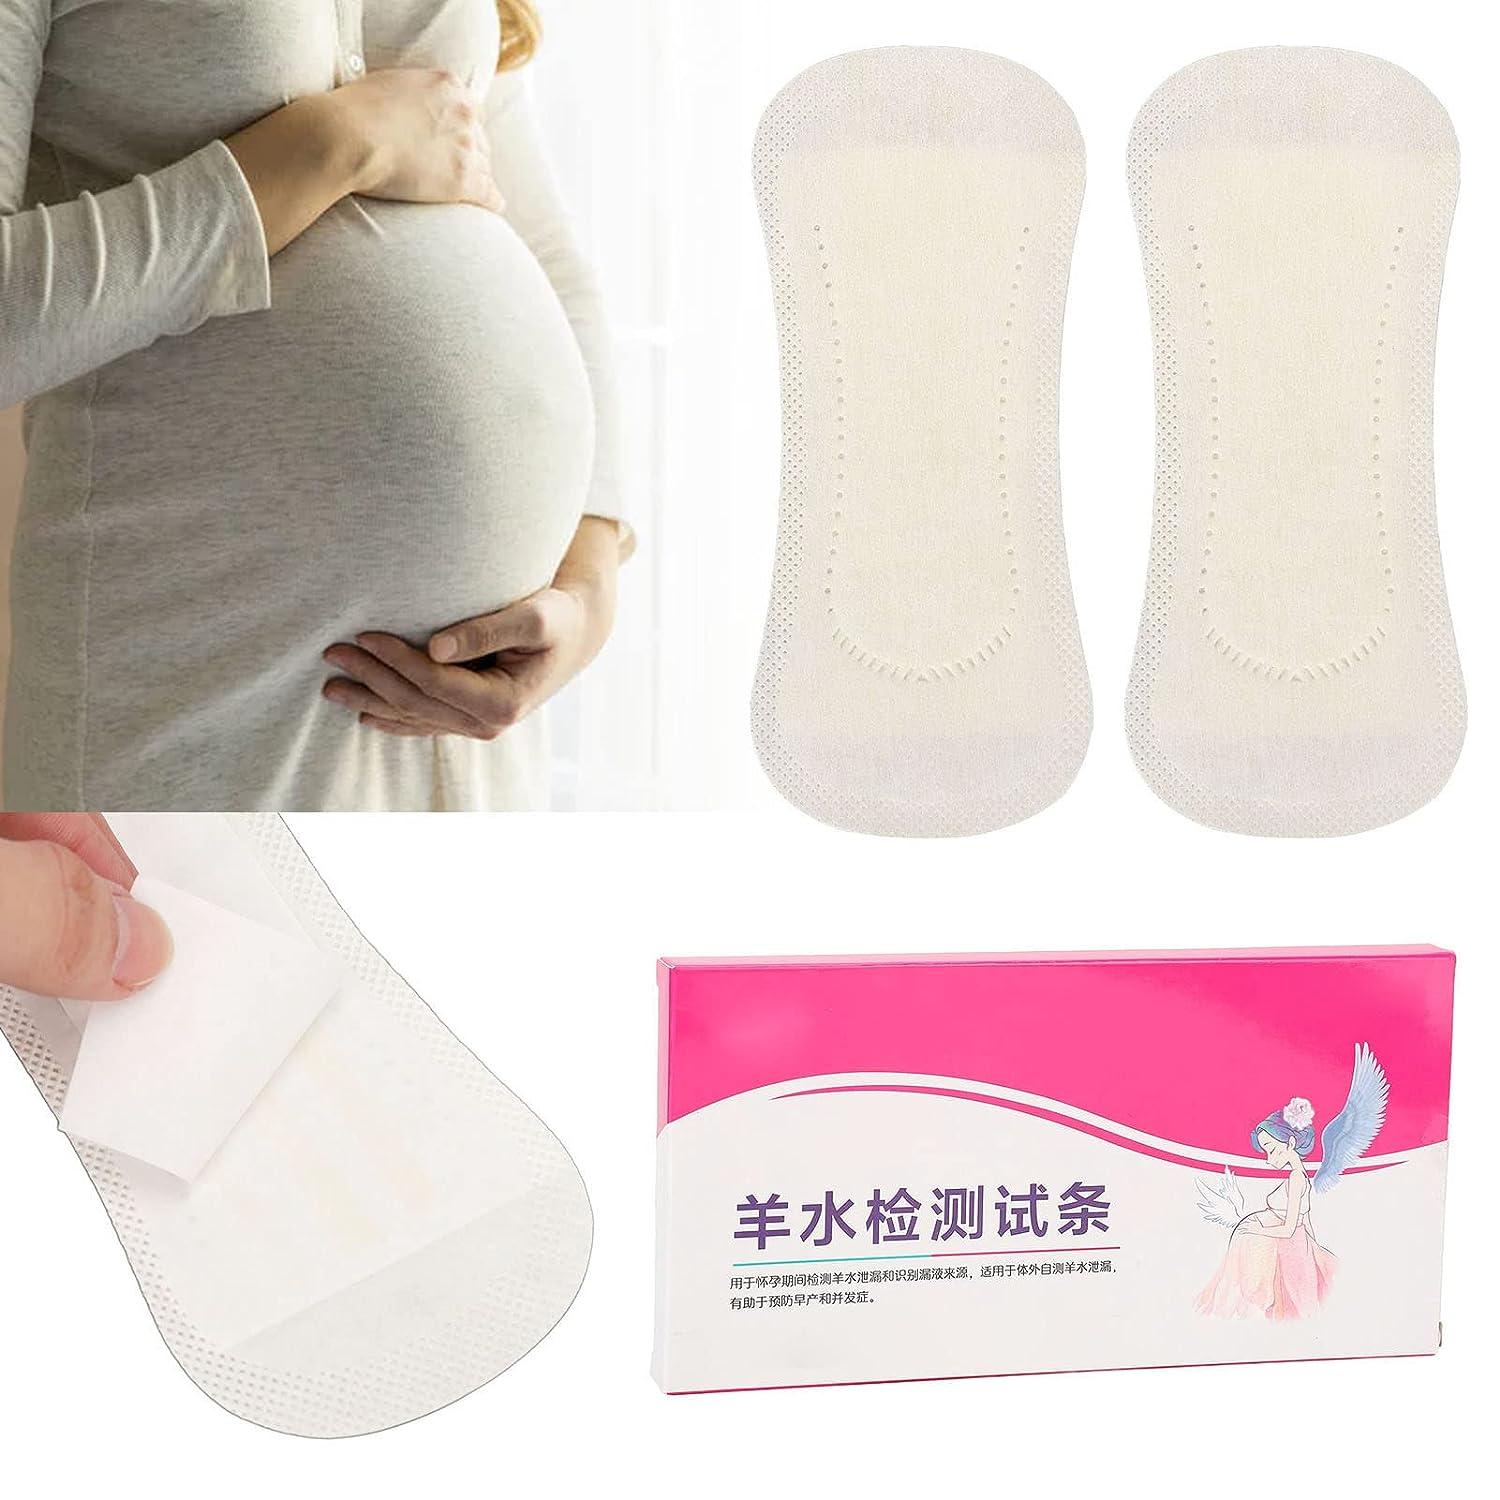 amniotic fluid test strips at home